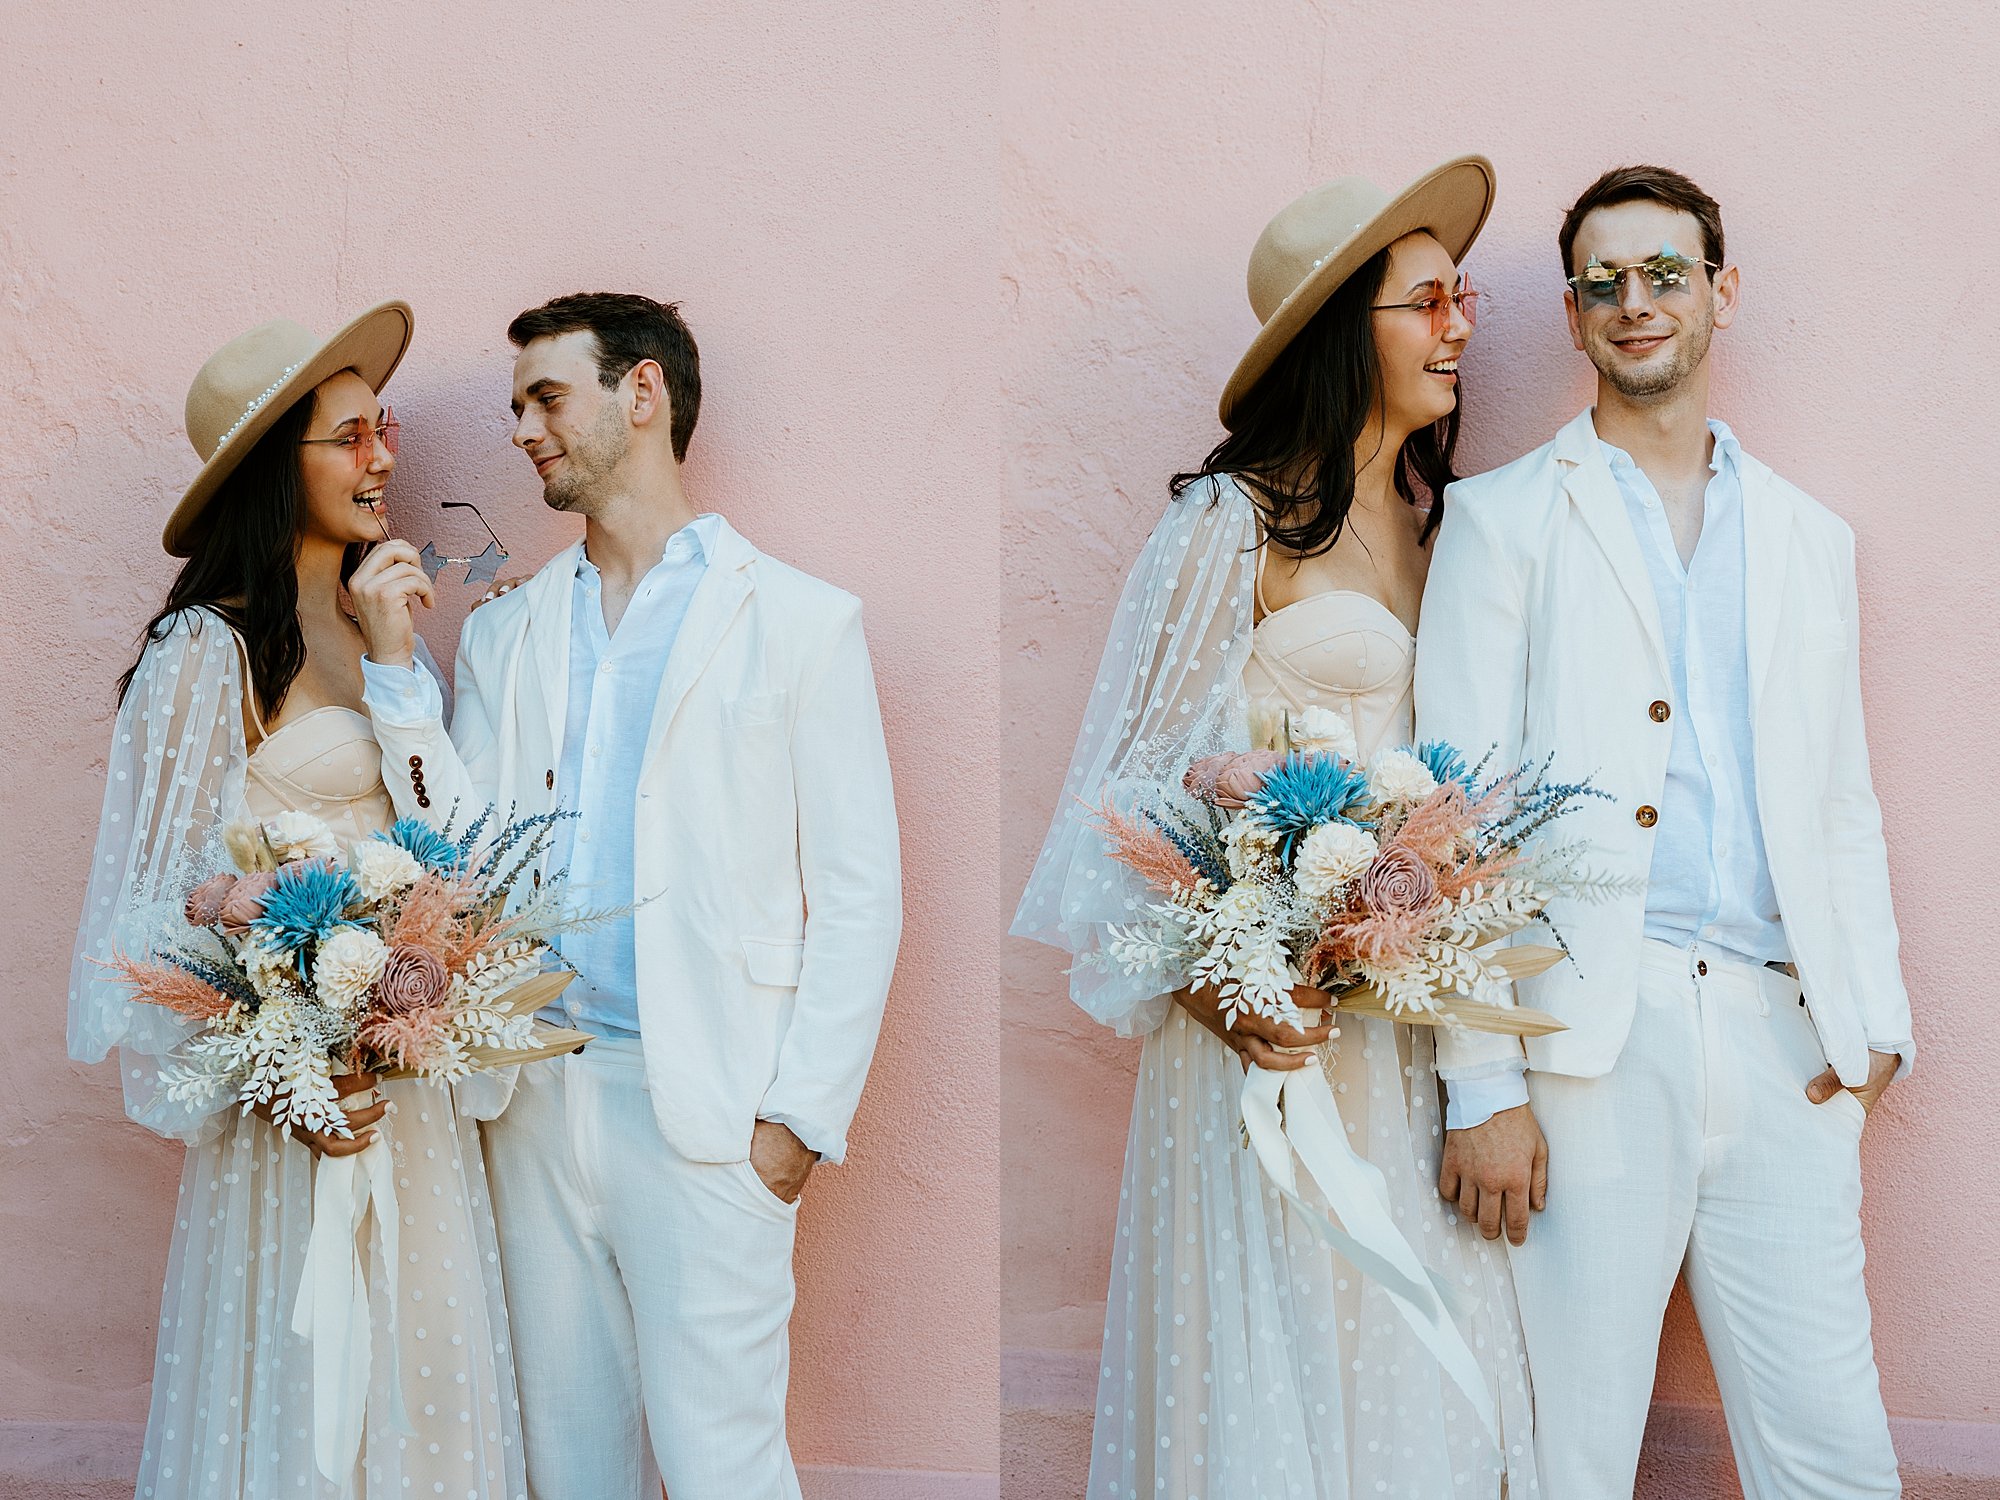 Couple stands together in front of a pink wall on Rainbow Row making cute faces at each other